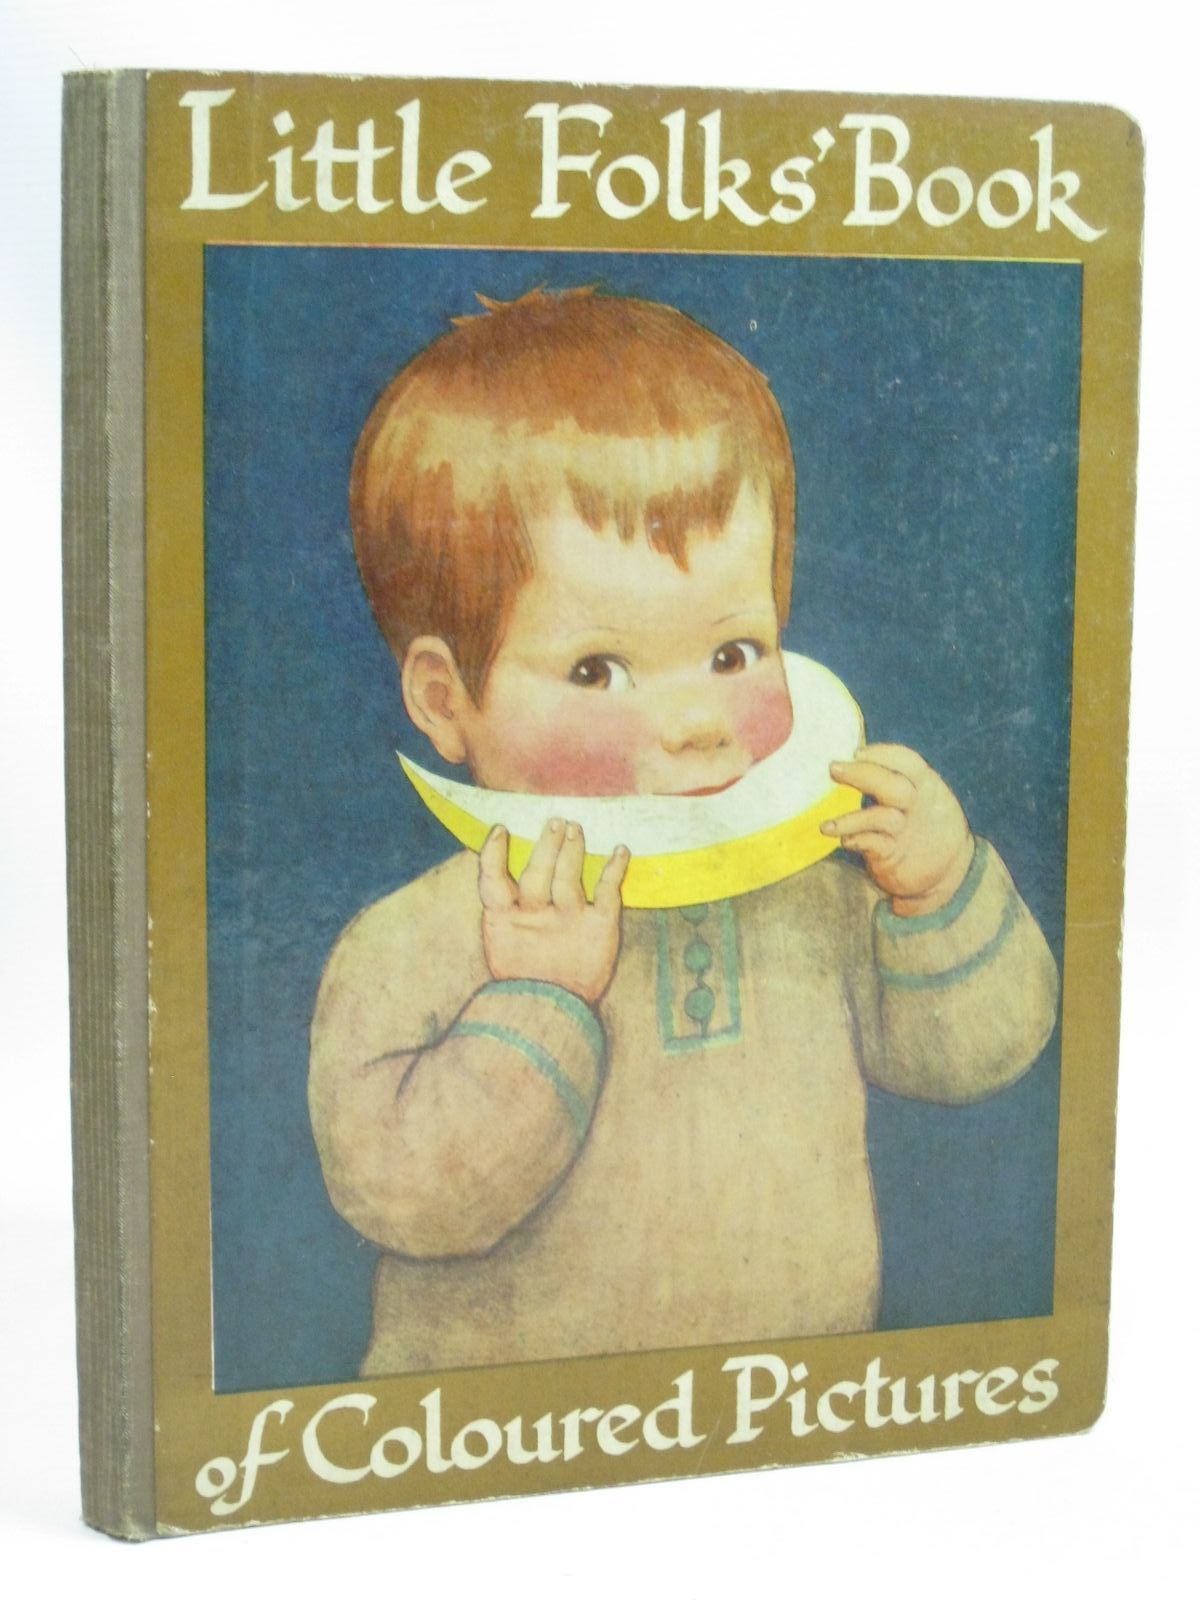 Photo of LITTLE FOLKS' BOOK OF COLOURED PICTURES illustrated by Topham, Inez
Woolley, Harry
Attwell, Mabel Lucie
Wood, Lawson
Appleton, Honor C.
et al., published by Thomas Nelson and Sons Ltd. (STOCK CODE: 1506060)  for sale by Stella & Rose's Books